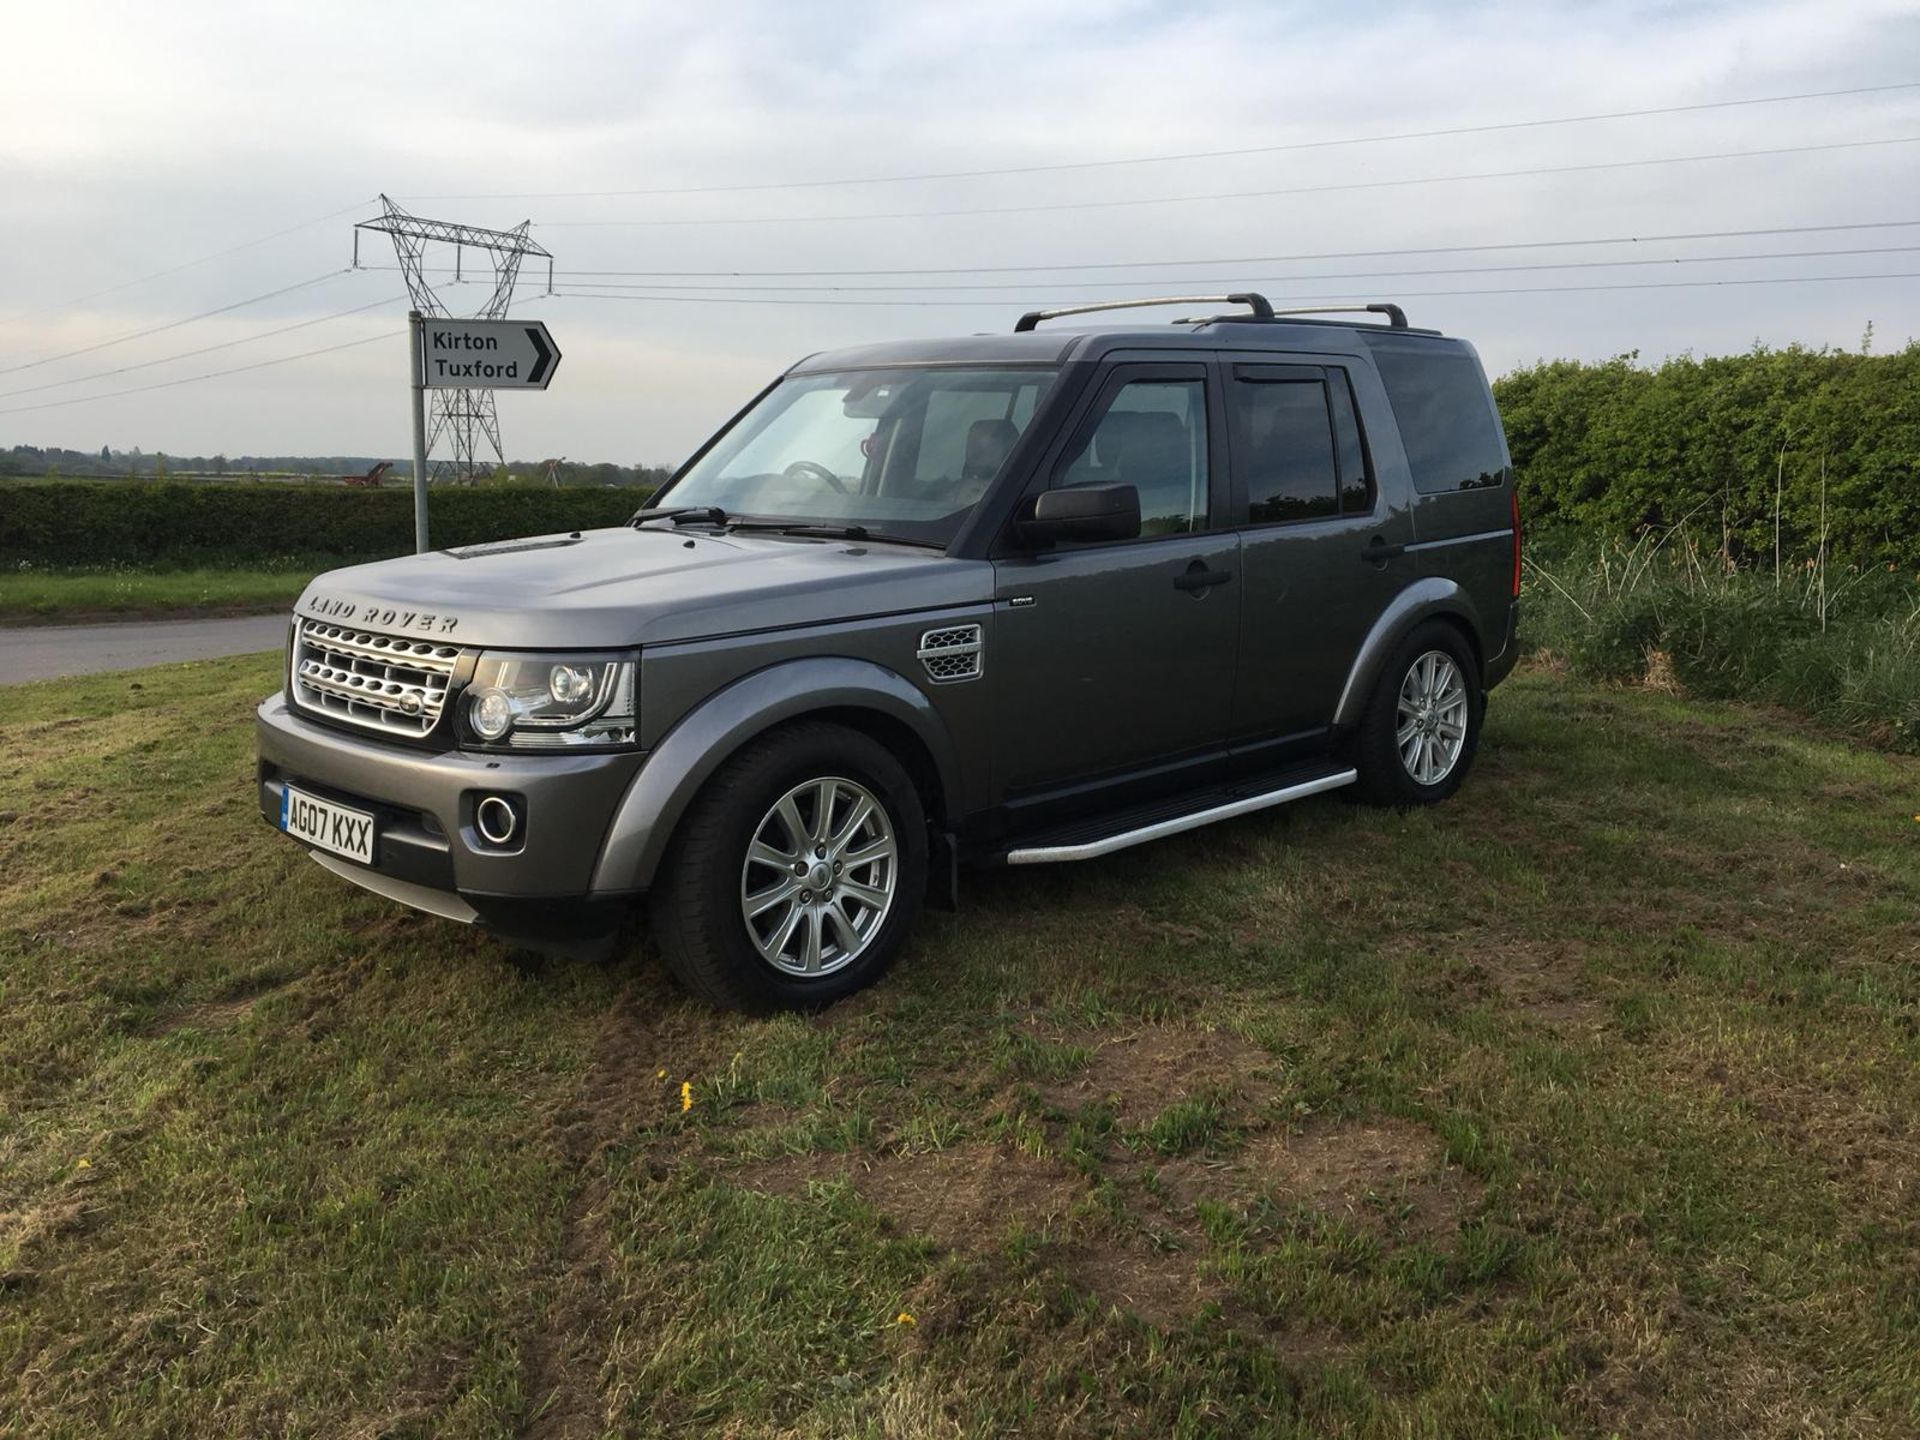 2007/07 REG LAND ROVER DISCOVERY 3 TDV6 SE AUTOMATIC 2.7 DIESEL 4X4, 7 SEAT FACELIFT LIGHTS *NO VAT* - Image 4 of 16